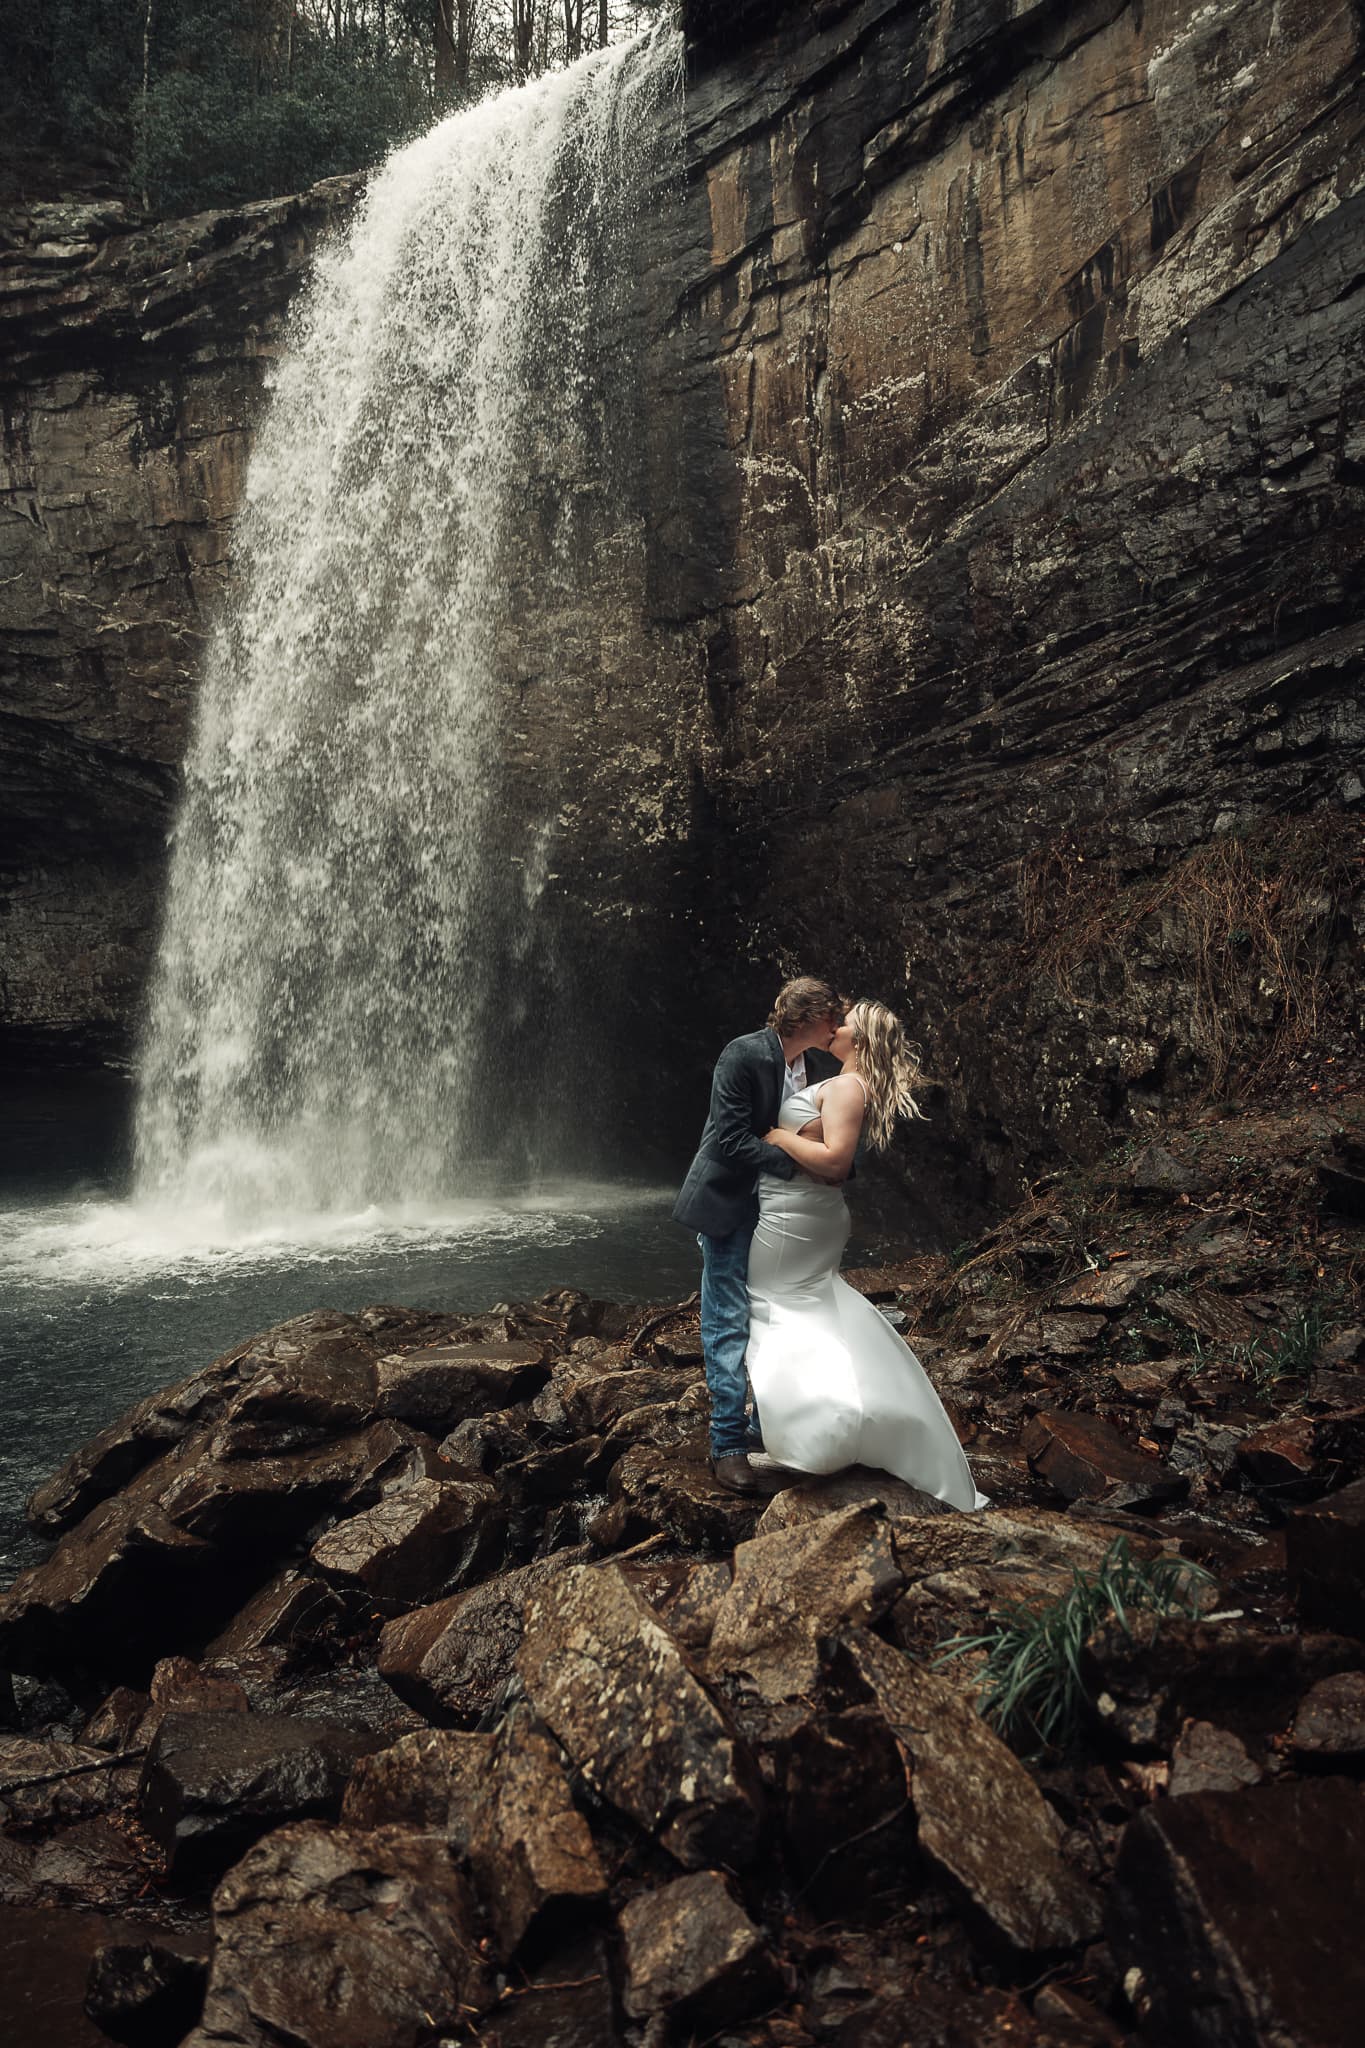 Ashlyn & Brent share a passionate kiss at the base of Foster Falls. The wind is blowing their hair and her dress.